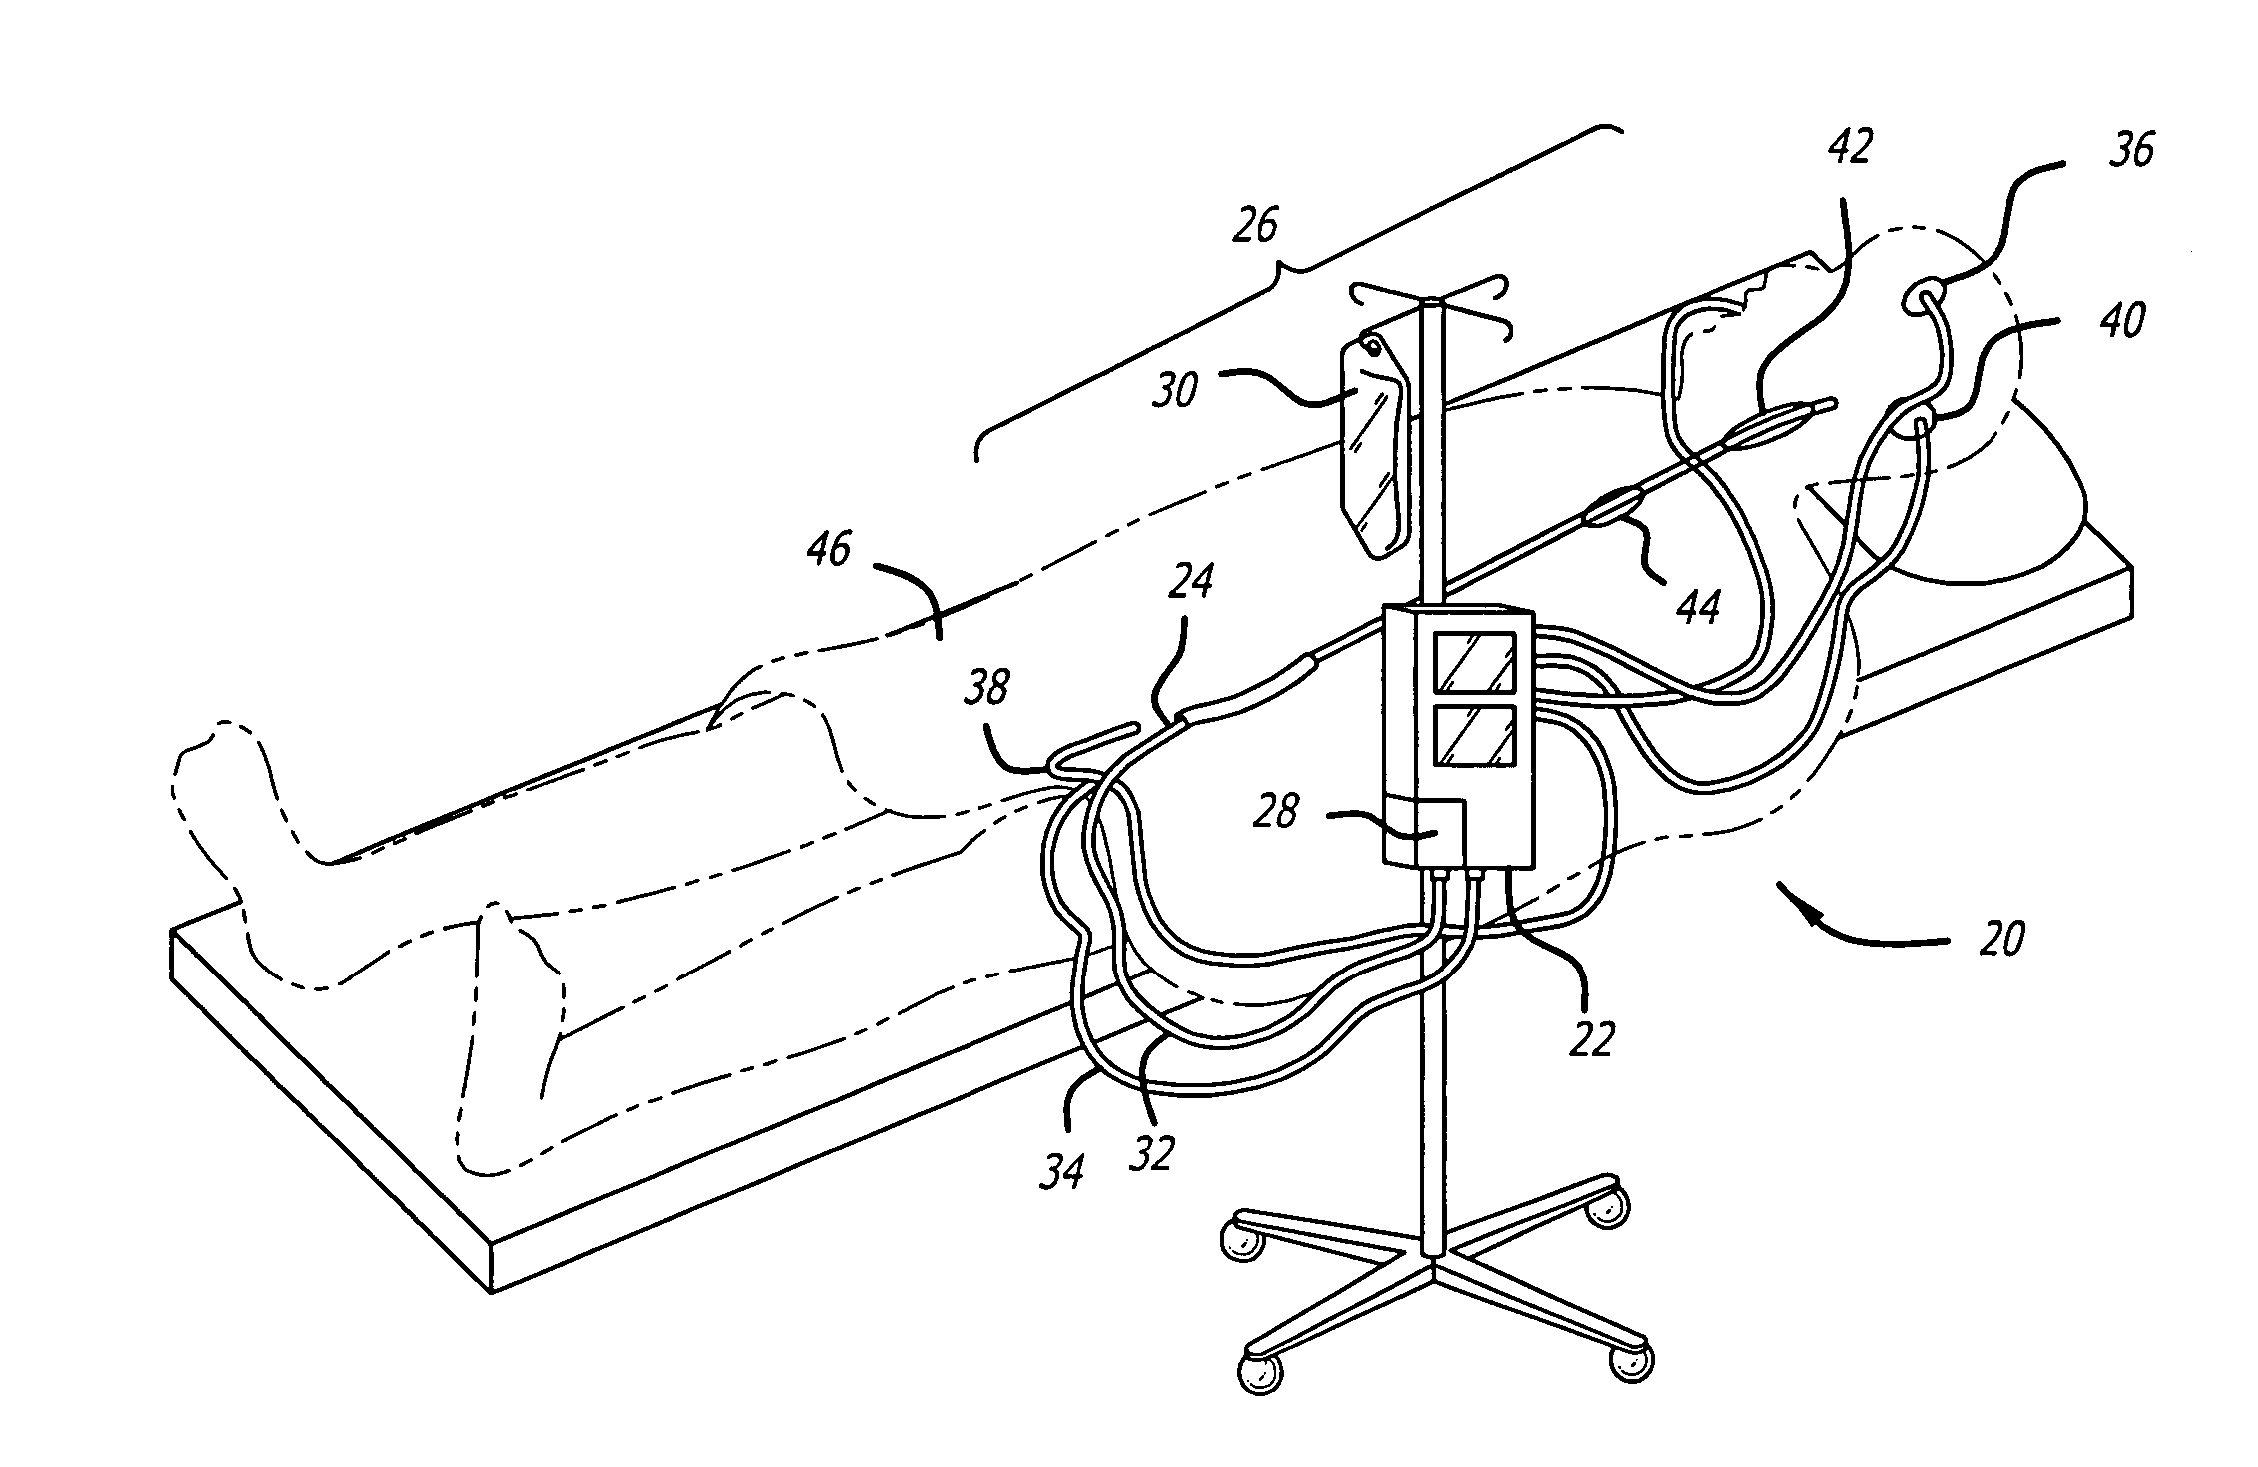 Apparatus and method for providing enhanced heat transfer from a body